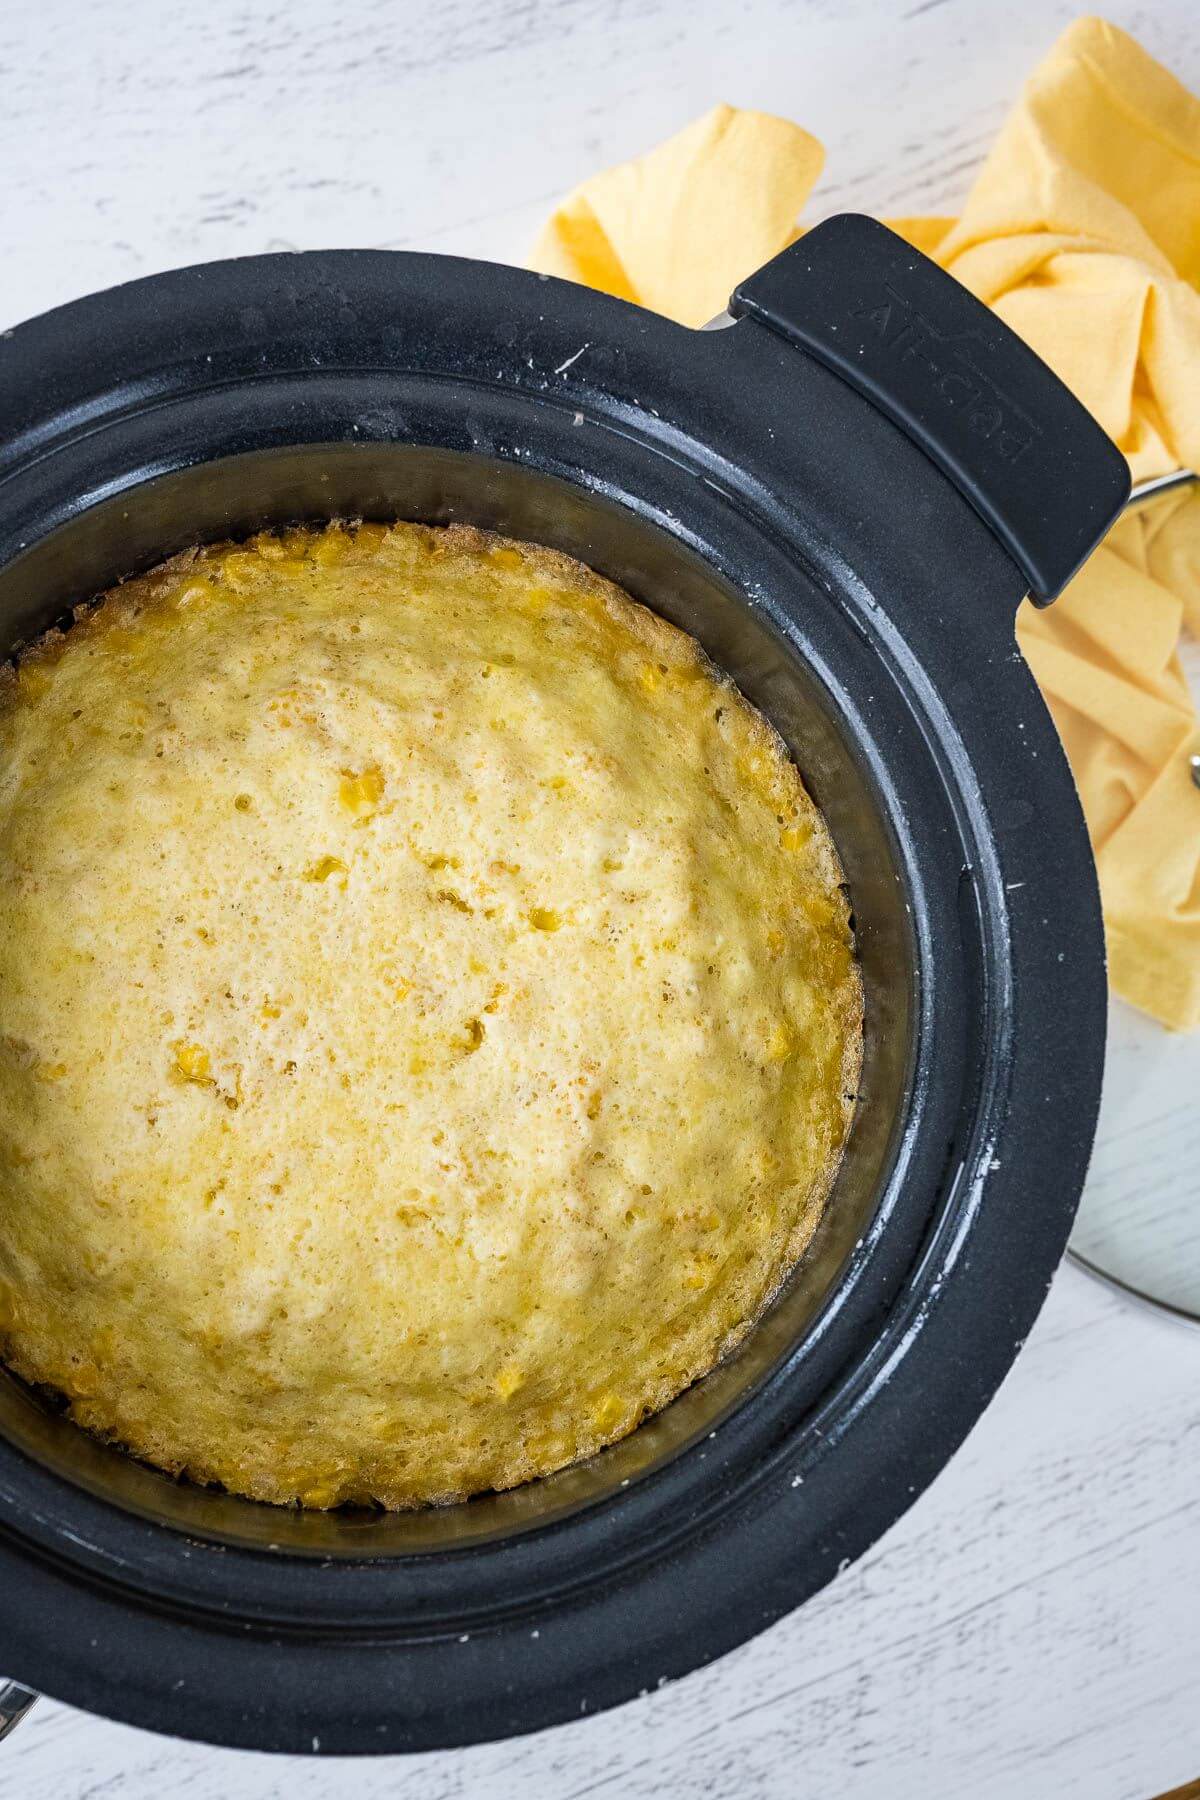 Corn pudding made in crockpot puffed and ready to serve.